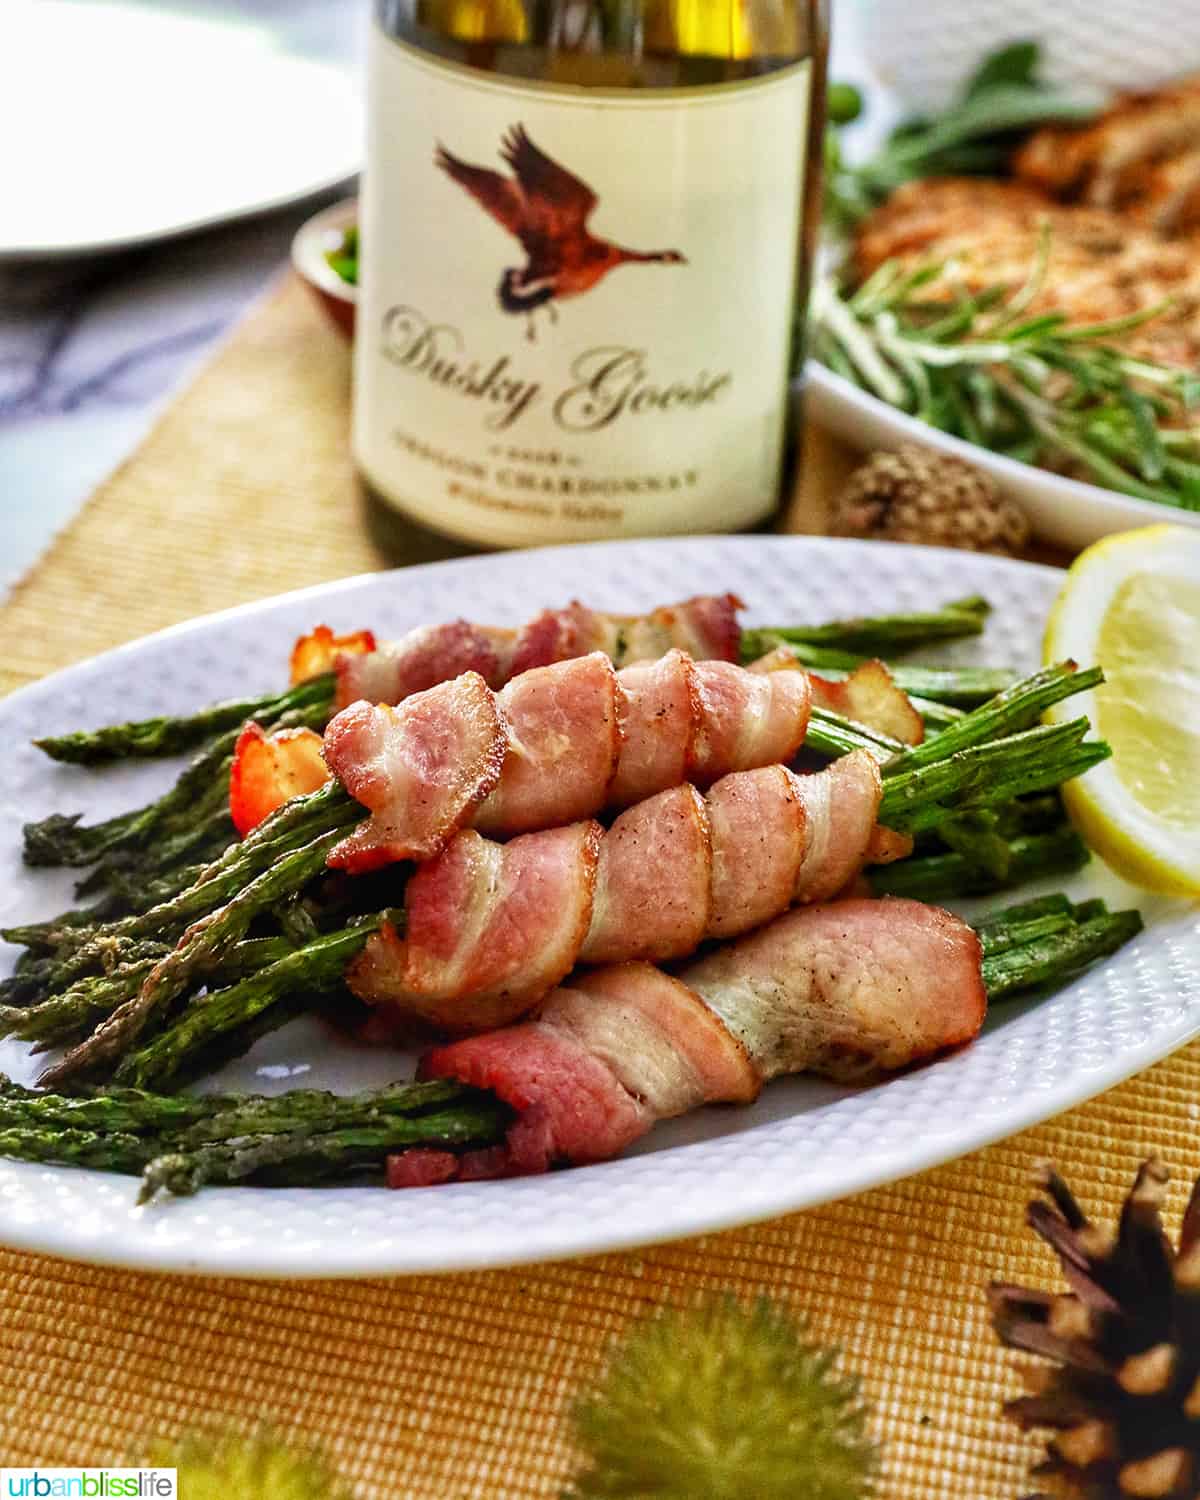 bacon wrapped asparagus on a white plate with a bottle of Oregon Chardonnay.